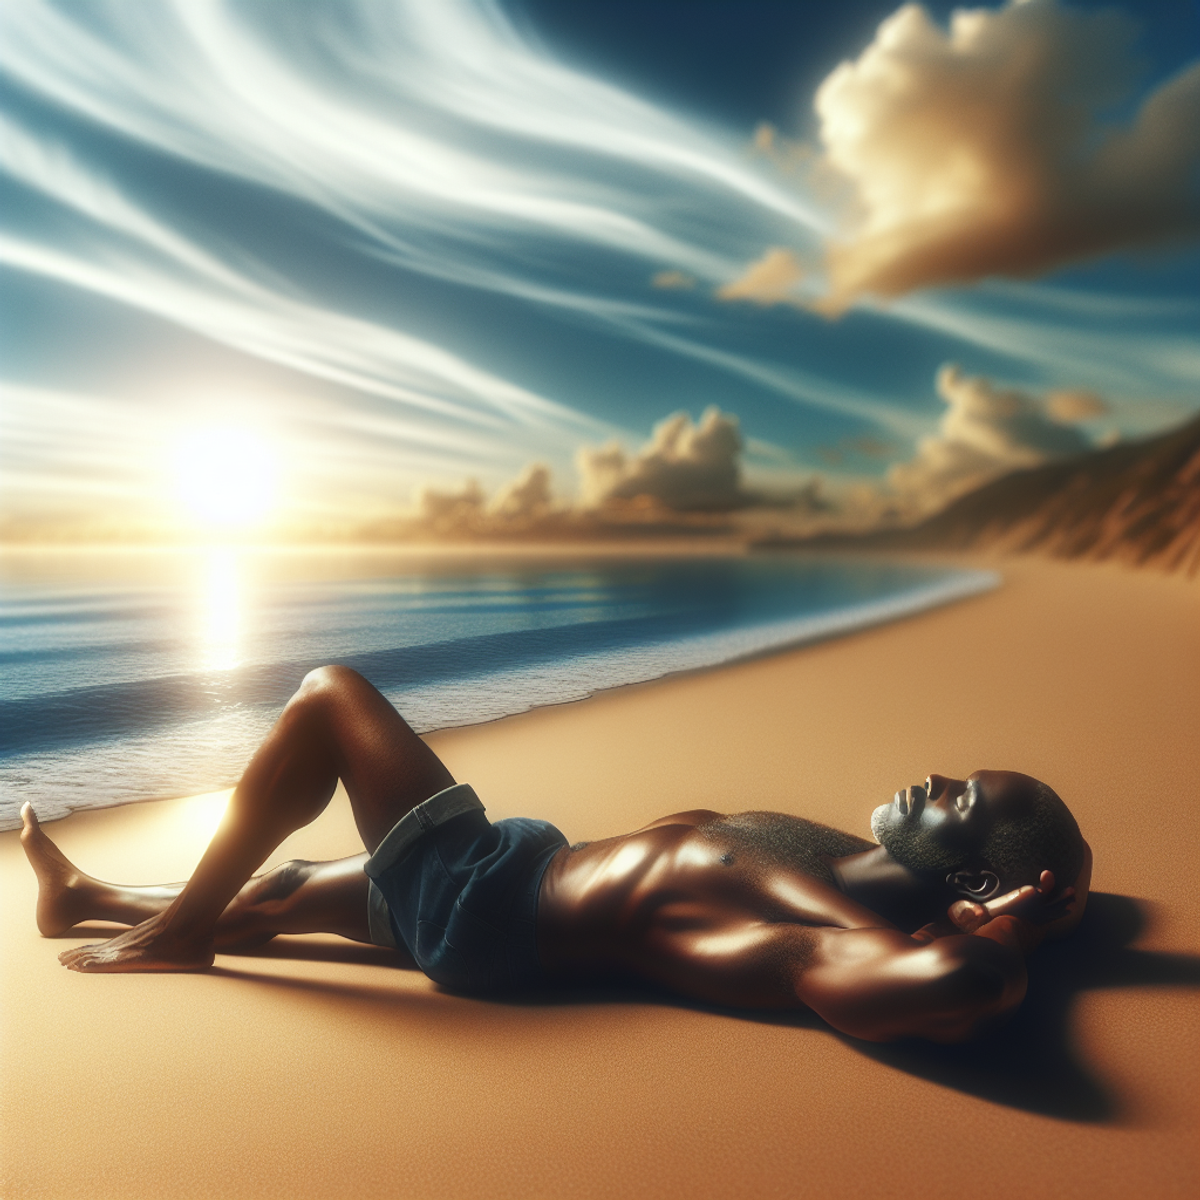 A middle-aged Black man reclining on a sandy beach, gazing at the tranquil ocean as the sun sets.